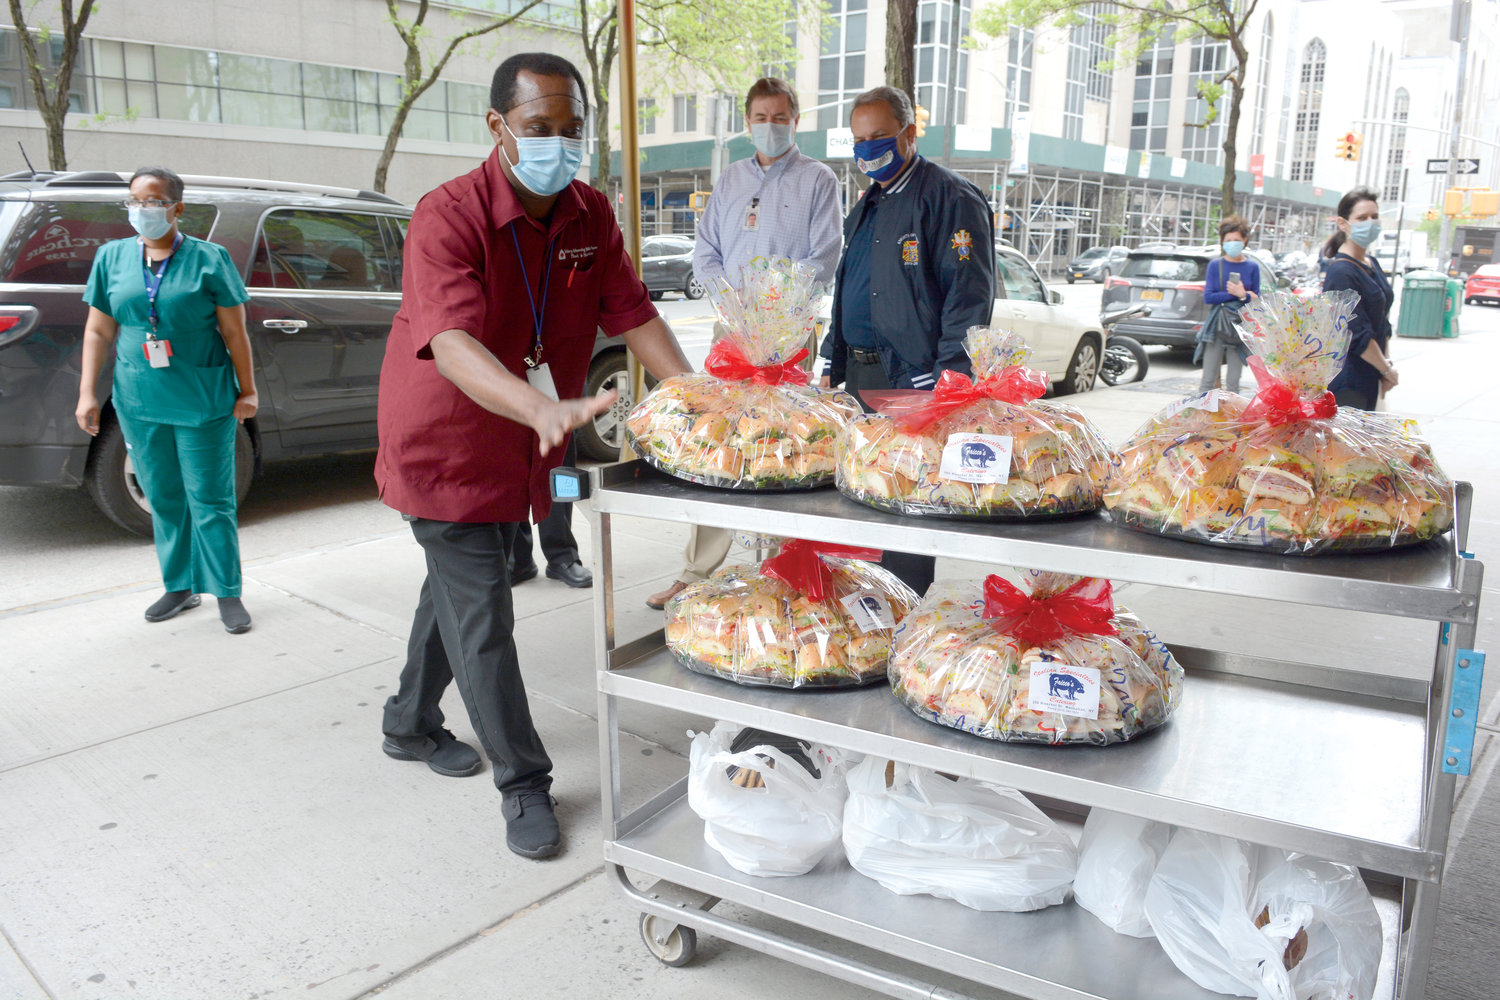 A luncheon of 250 sandwiches is wheeled into the home. Carmine Musumeci of Marquette Council 157 in Manhattan and a Supreme director with the Knights of Columbus watches on right.